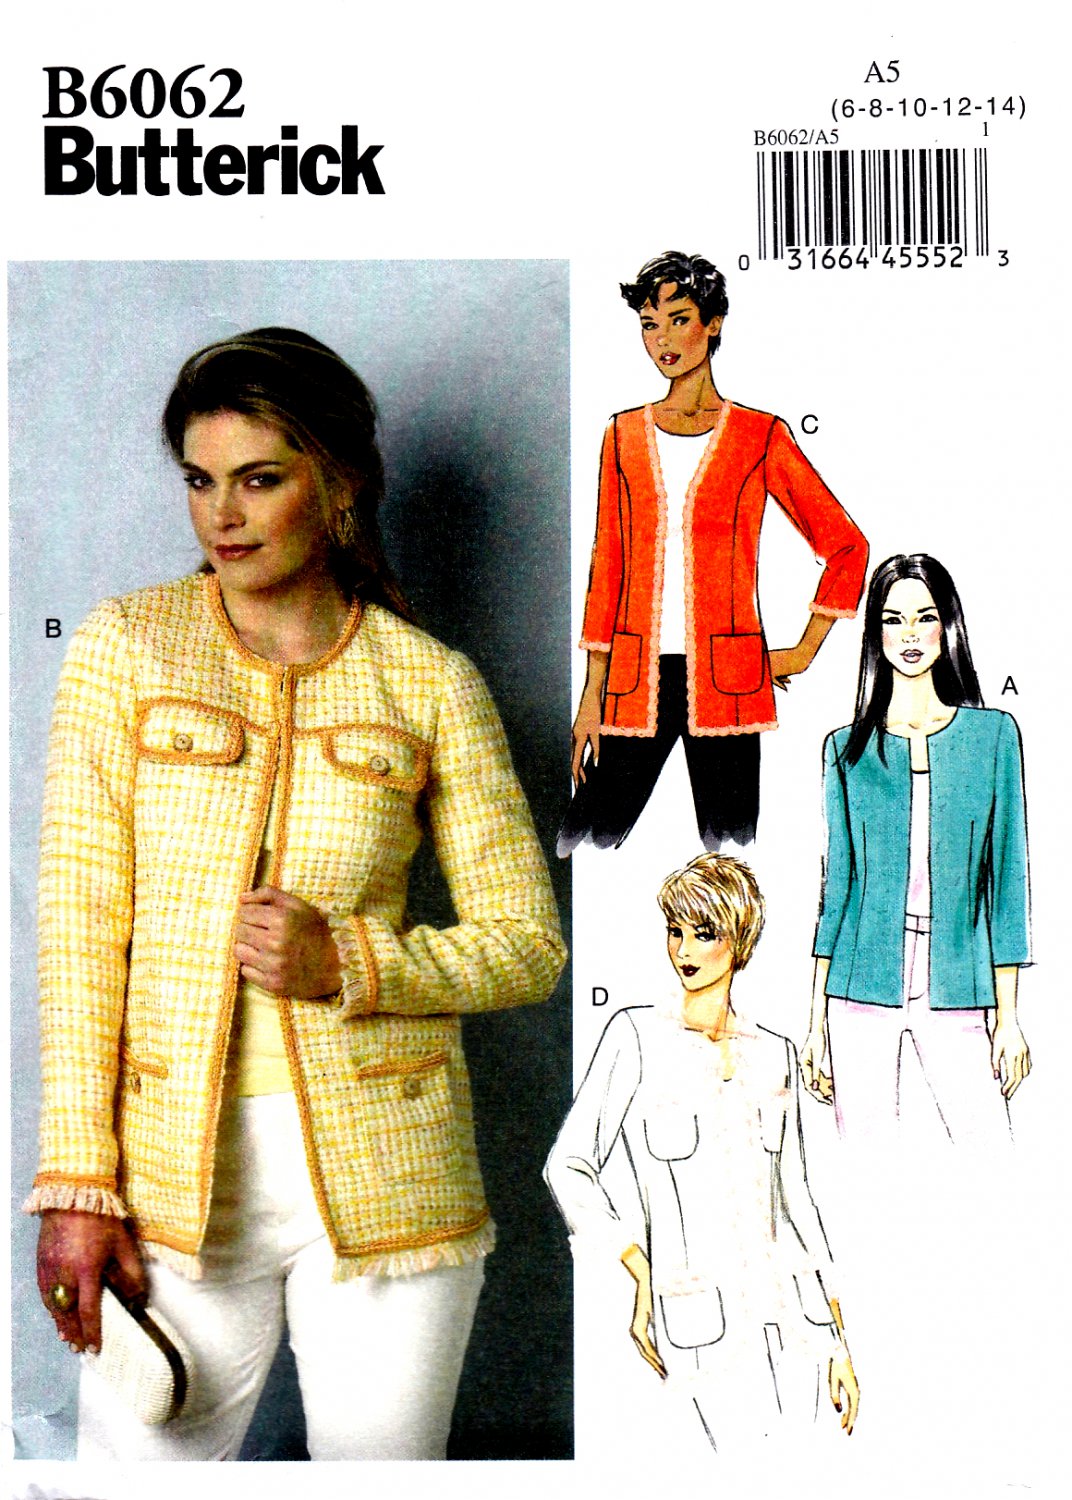 Butterick B6062 Misses Lined Jacket Sleeve Neck Variations Sewing Pattern Sizes 6-8-10-12-14